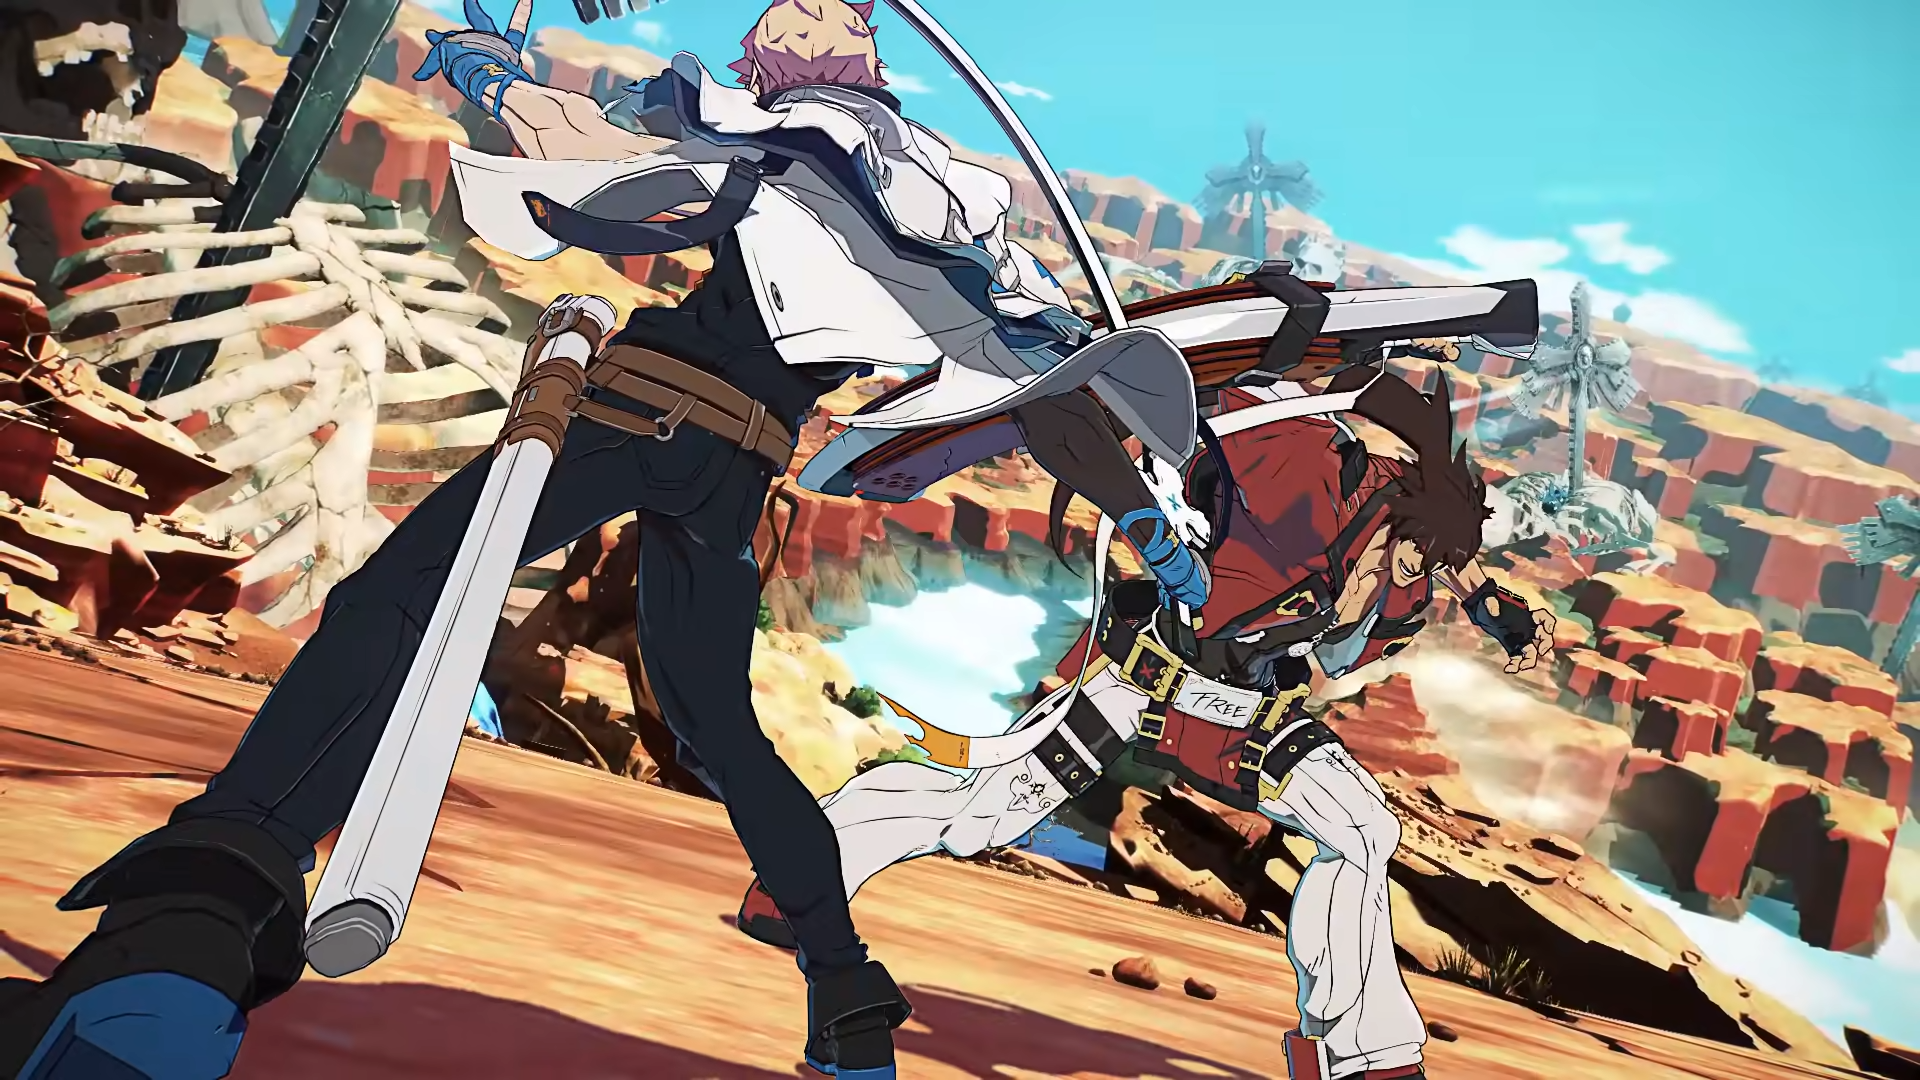 Guilty Gear Director: Strive Will Be The Deepest Game In The Series